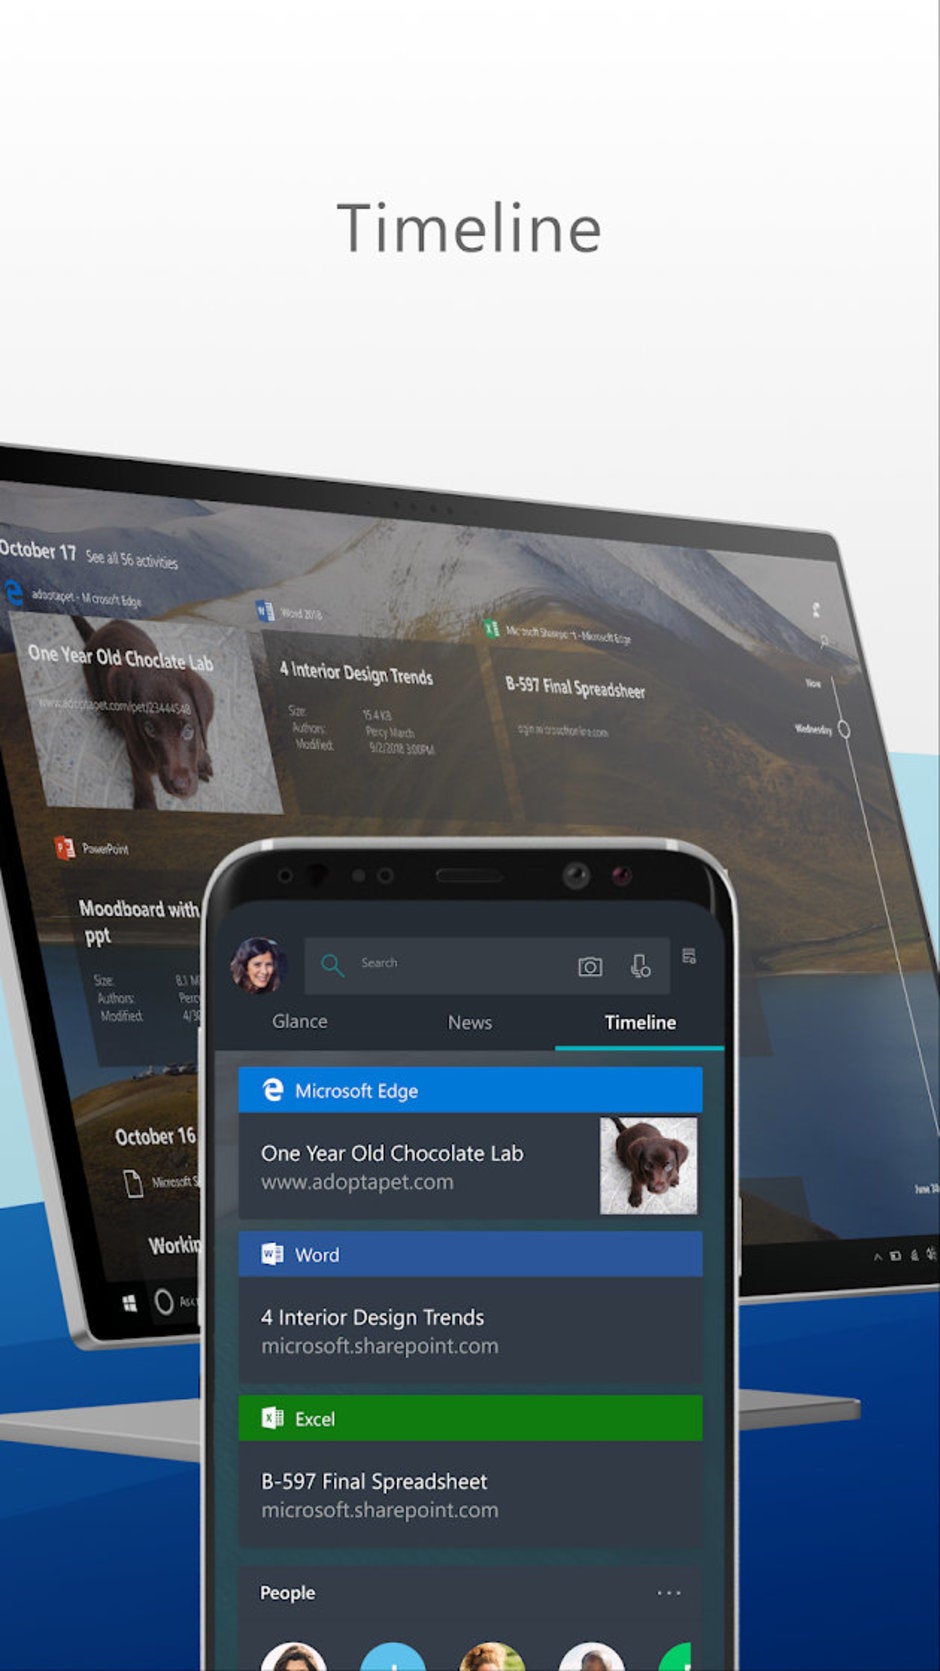 Microsoft Launcher 5.0 comes out of beta, adds major improvements, new features